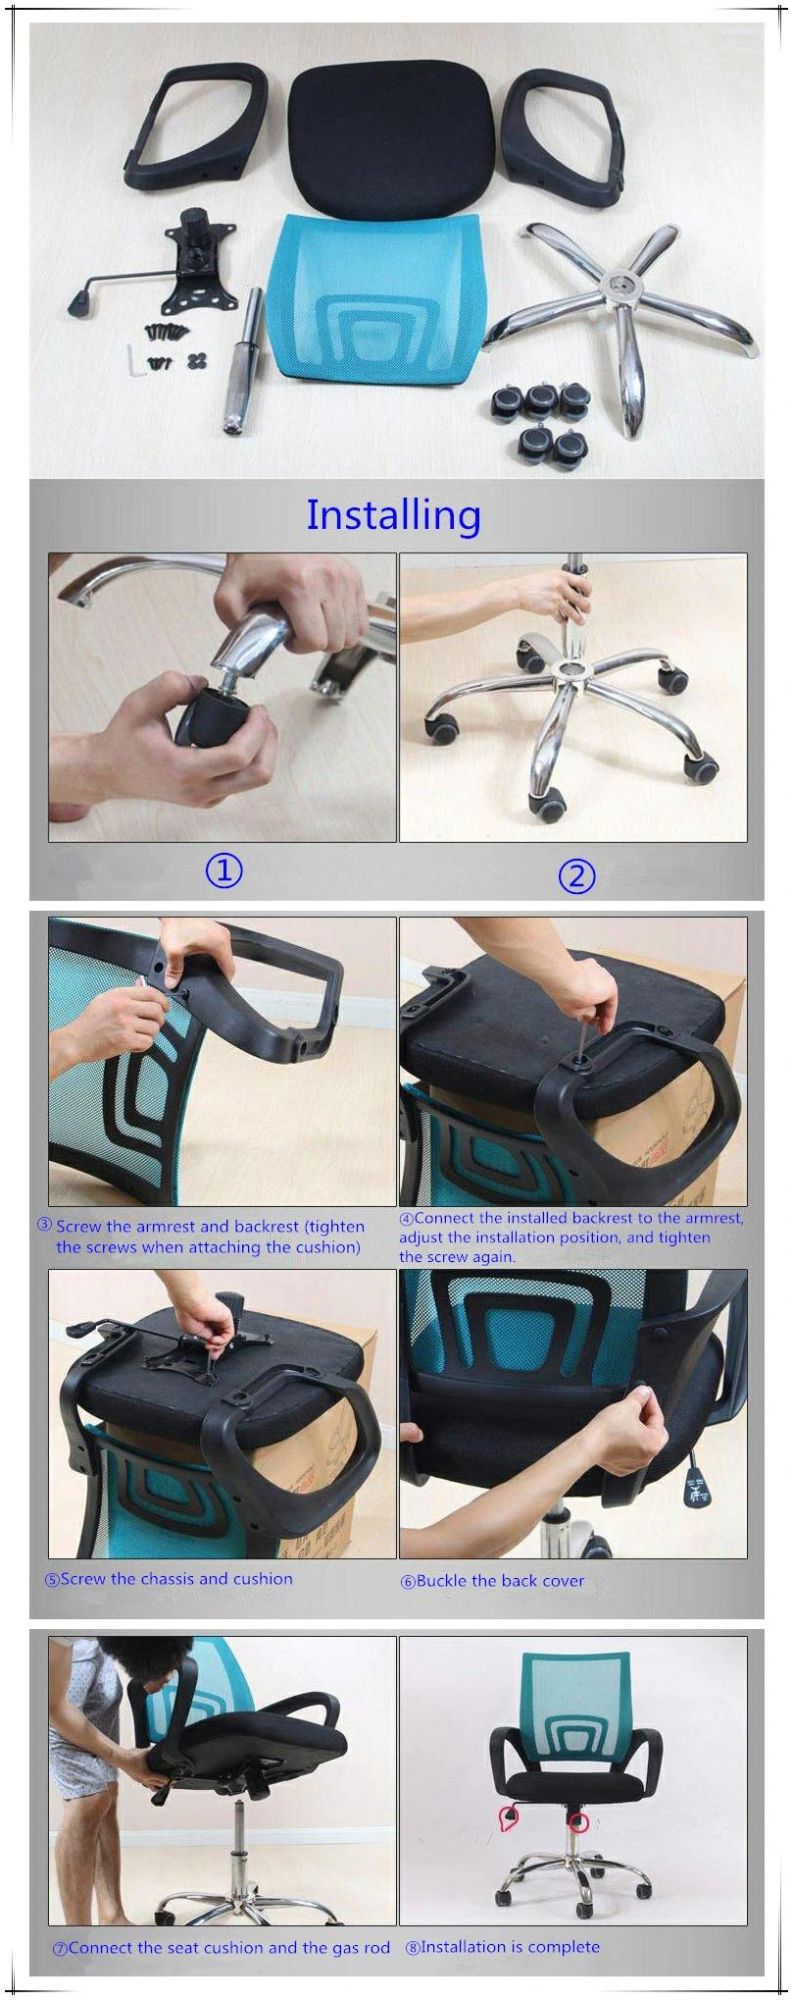 Commercial Furniture Best Price Office Chair Ergonomic Office Chair